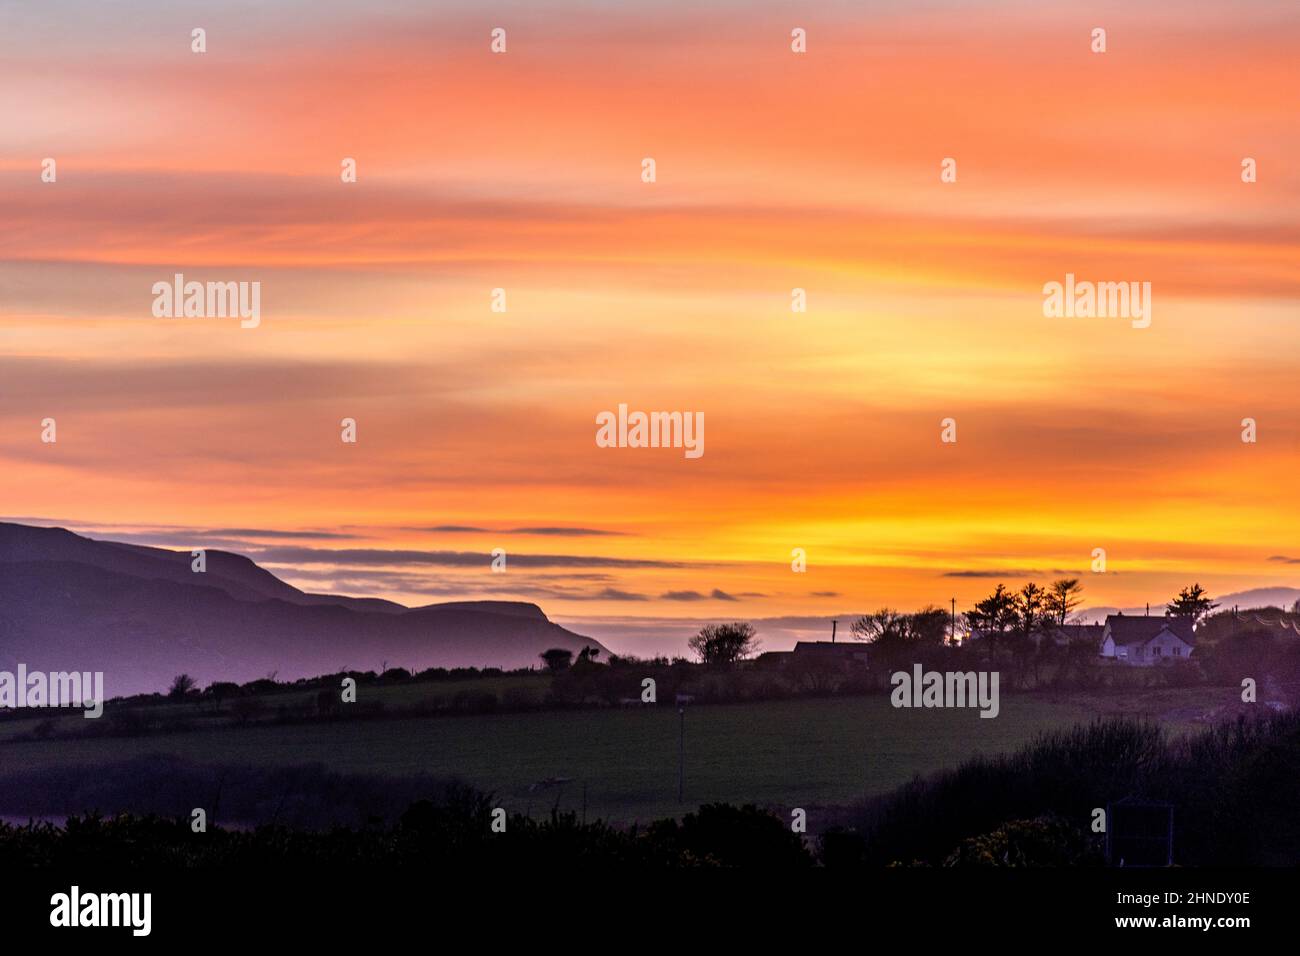 Rural house during a spectacular sunset on Wild Atlantic Way near Ardara, County Donegal, Ireland. Stock Photo